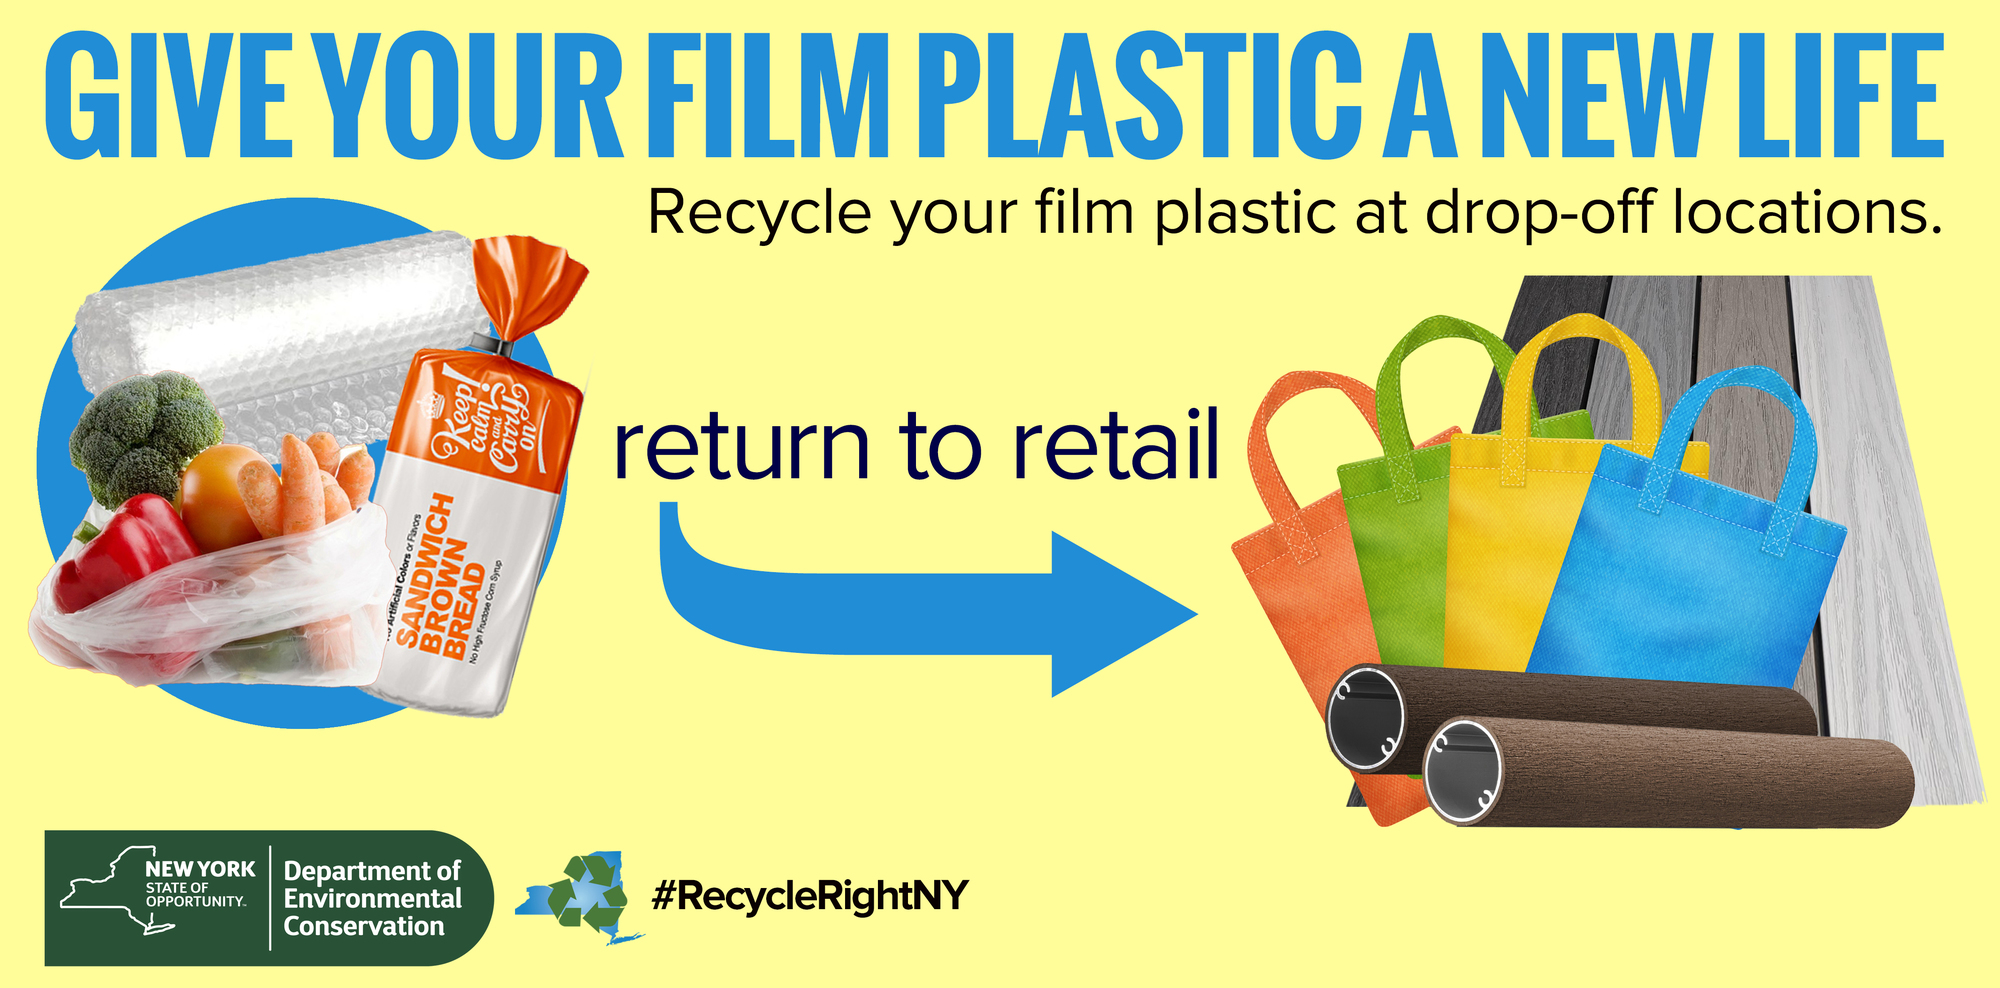 image showing that recycled film plastic can be turned into pipe, decking, and reusable bags